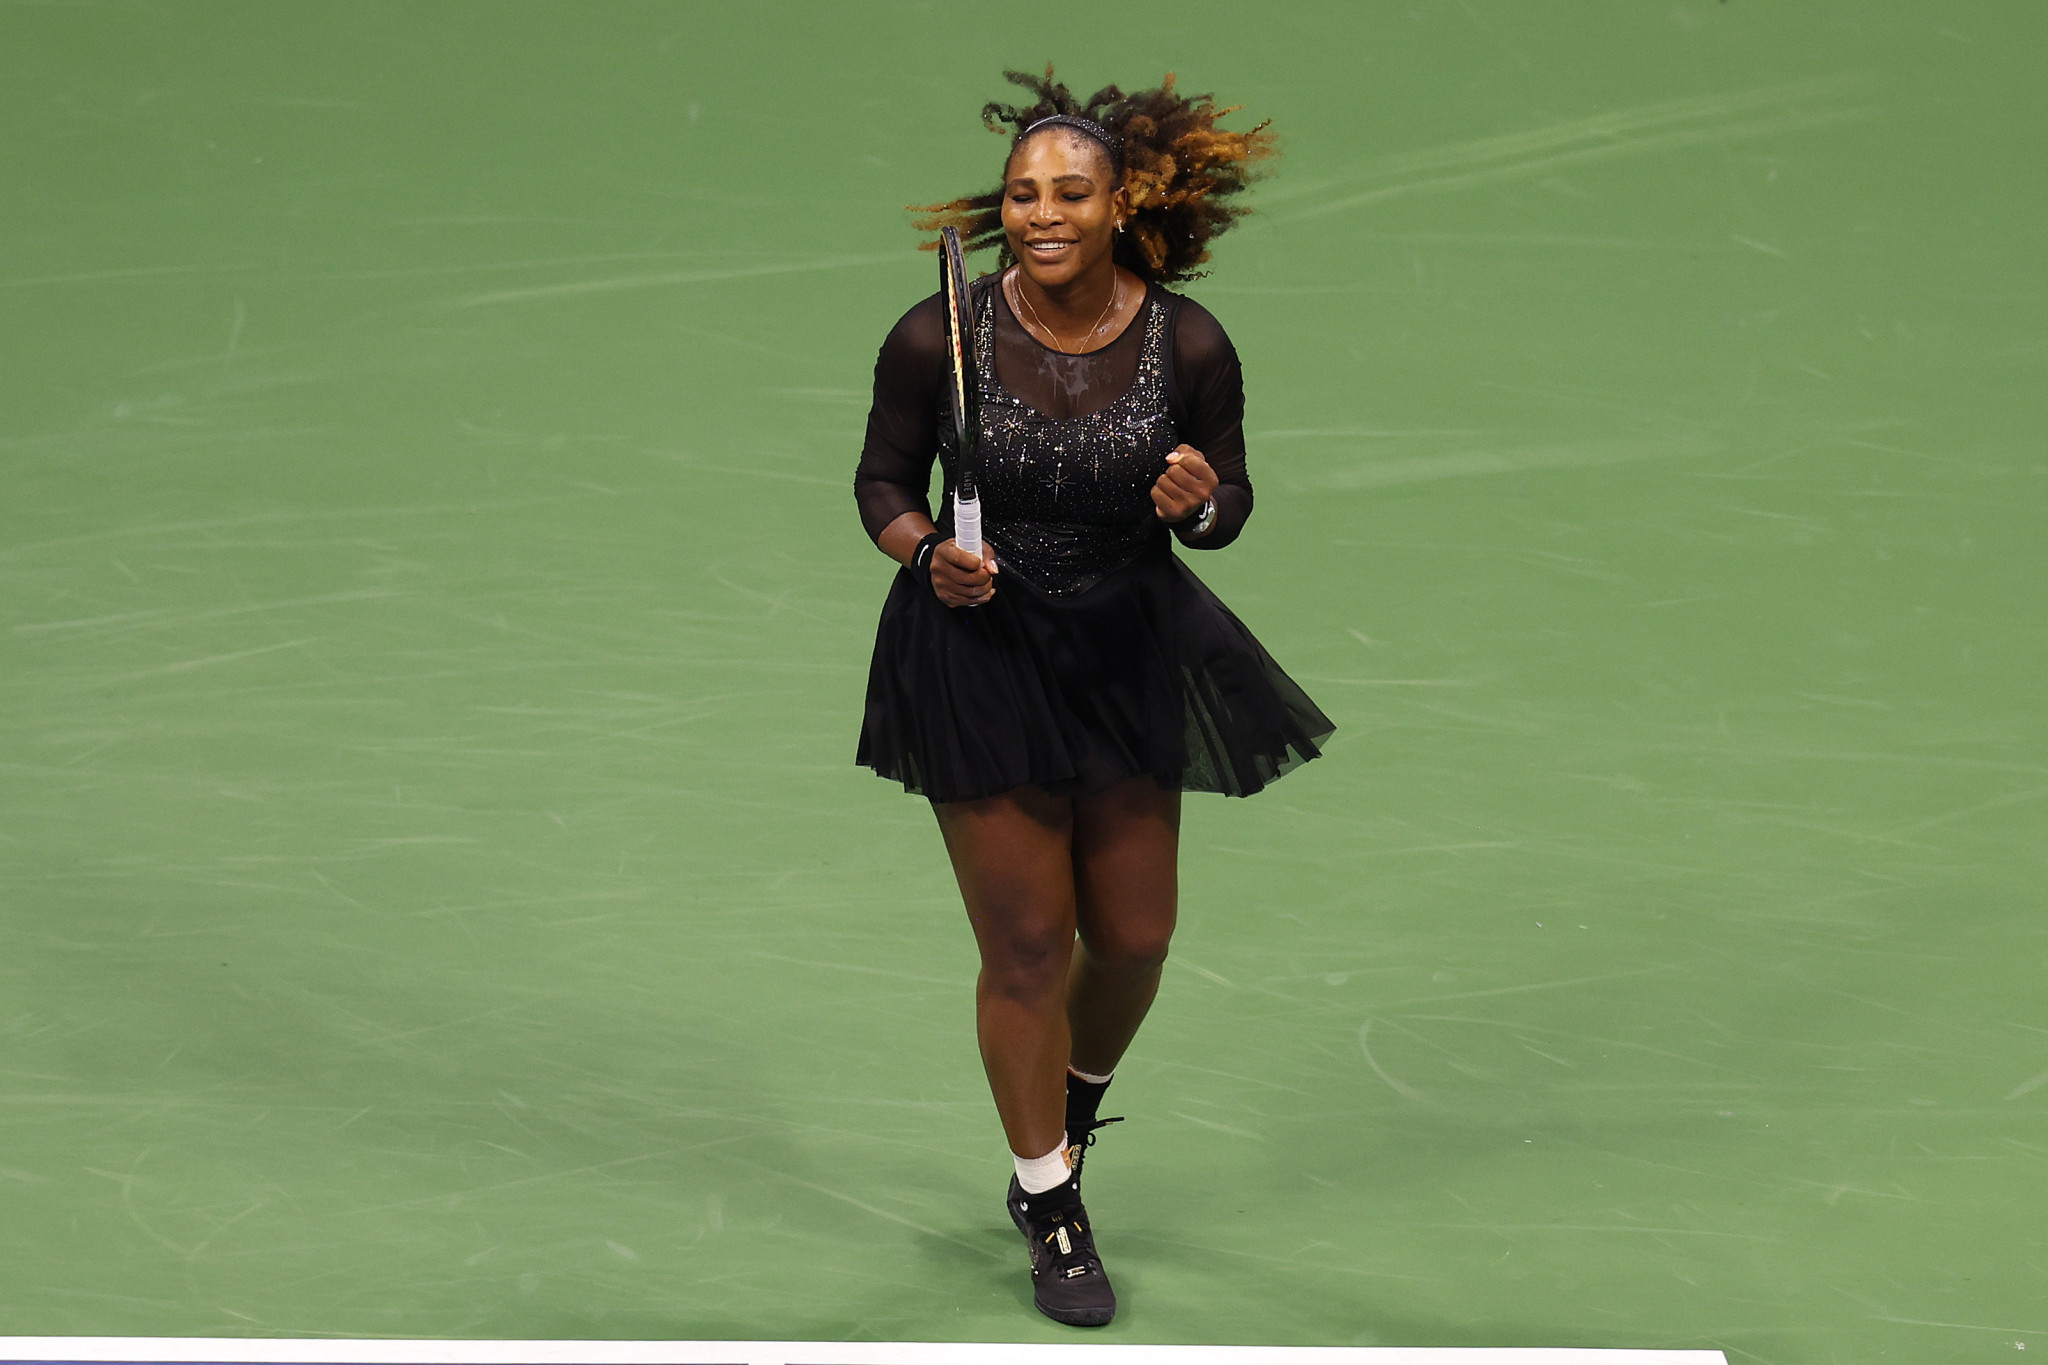 Serena Williams made a winning start at what is expected to be her final US Open ©Getty Images